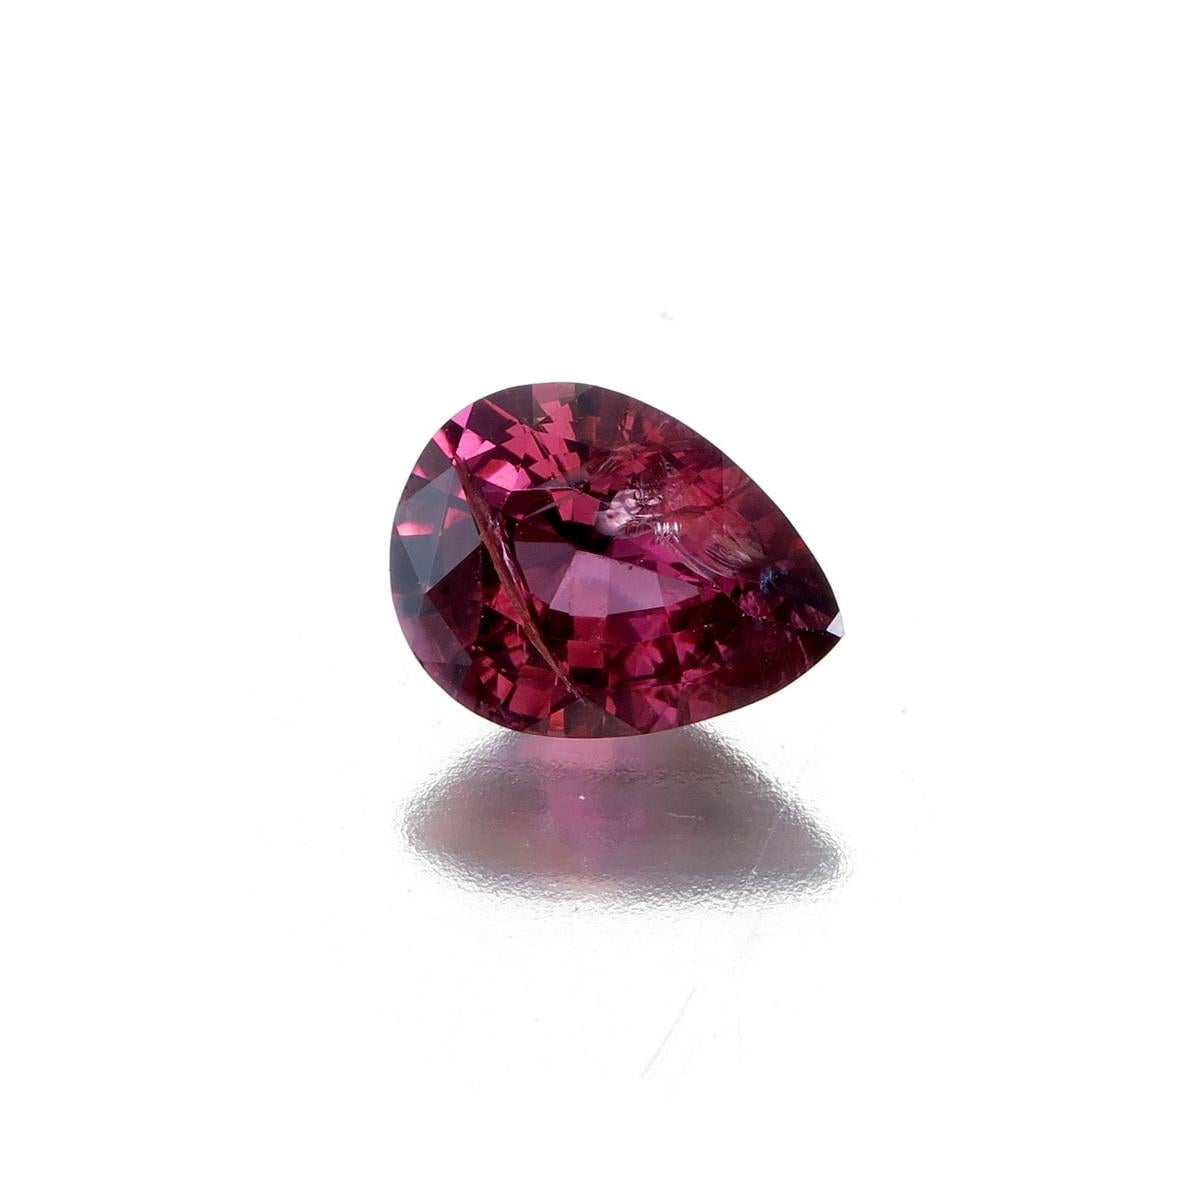 1.81 Carat Vivid Red Natural Spinel from Burma
Dimension: 9.34 x 7.13 x 4.28  mm
Shape: Pear Faceted Cut
Weight: 1.81Carat
No Heat
GIL certified Report No: STO2022101151316